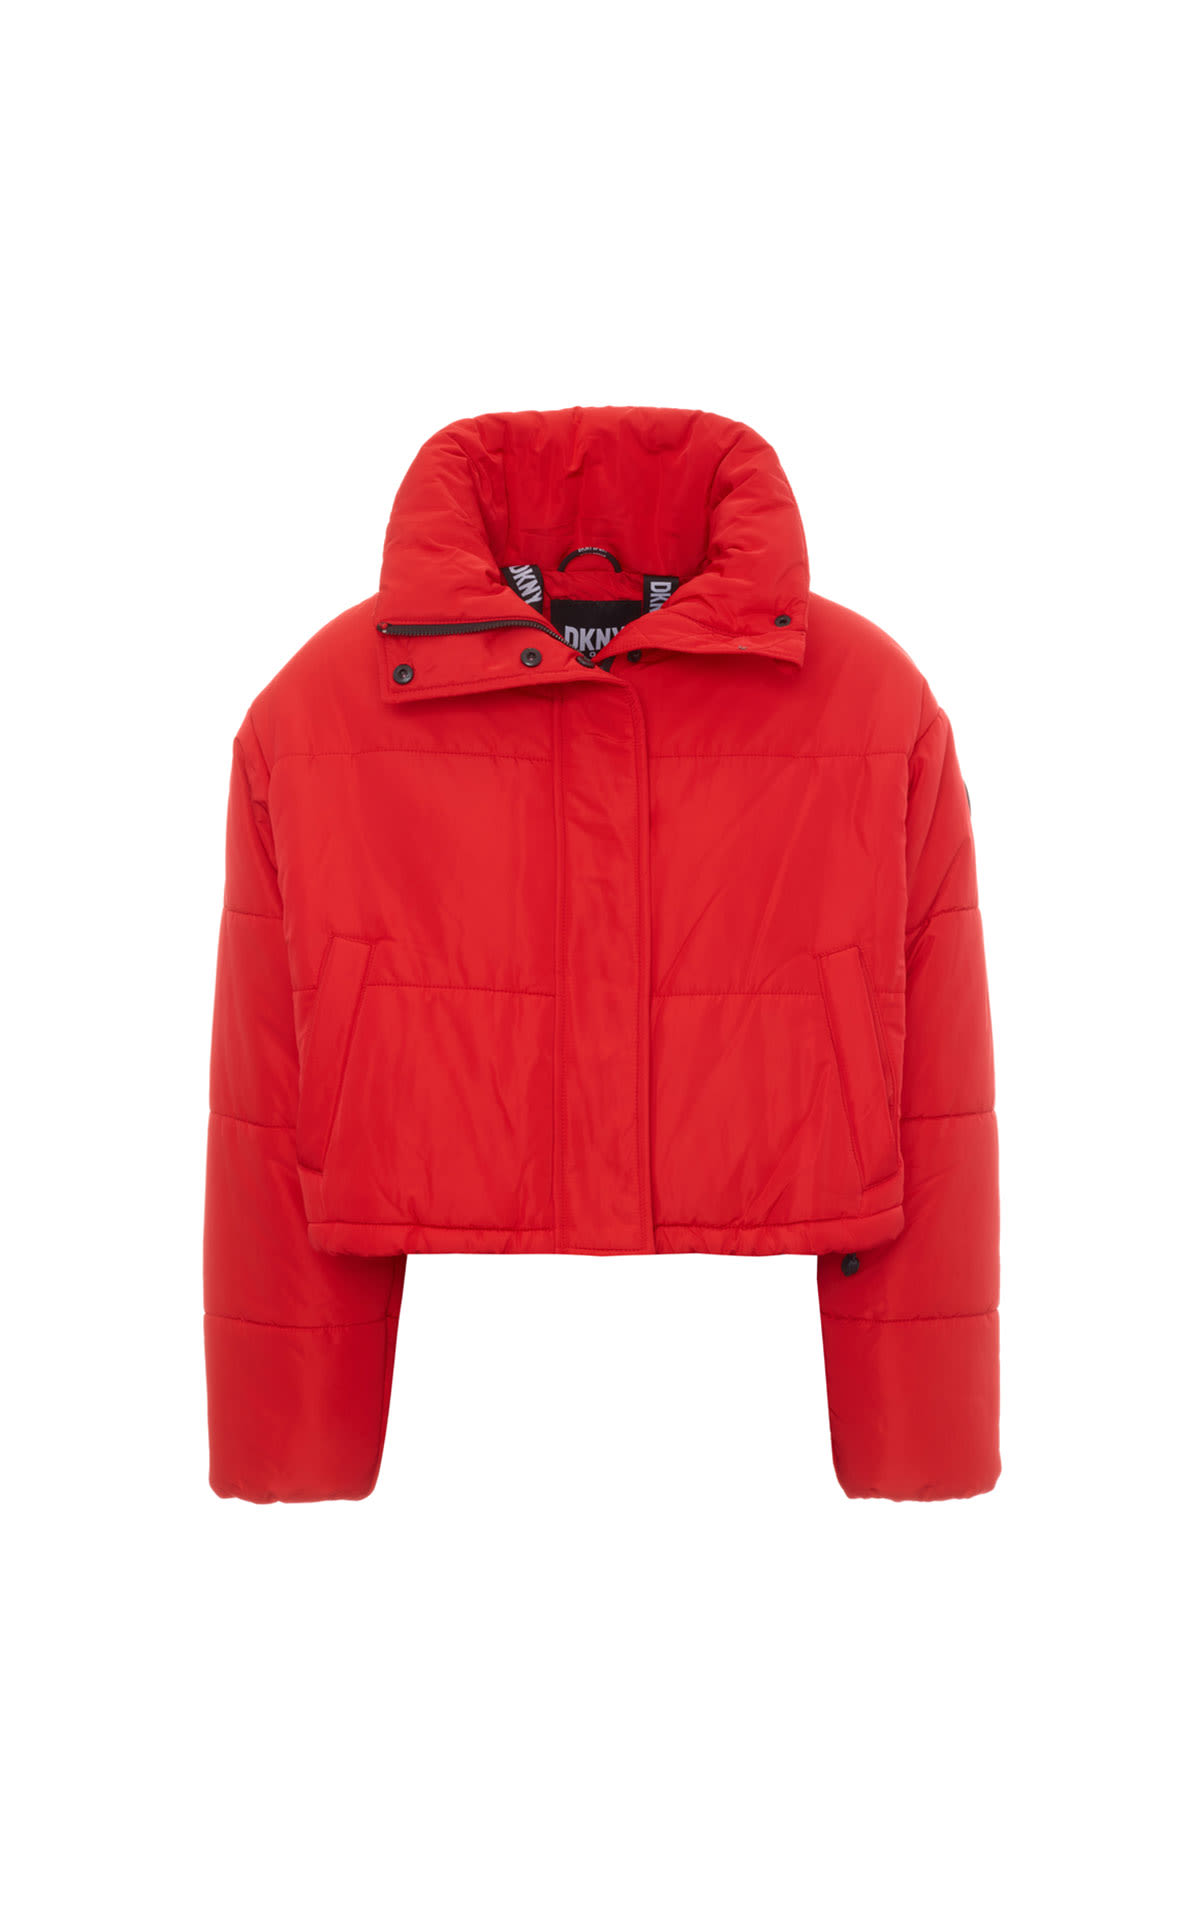 DKNY Red puffer jacket from Bicester Village